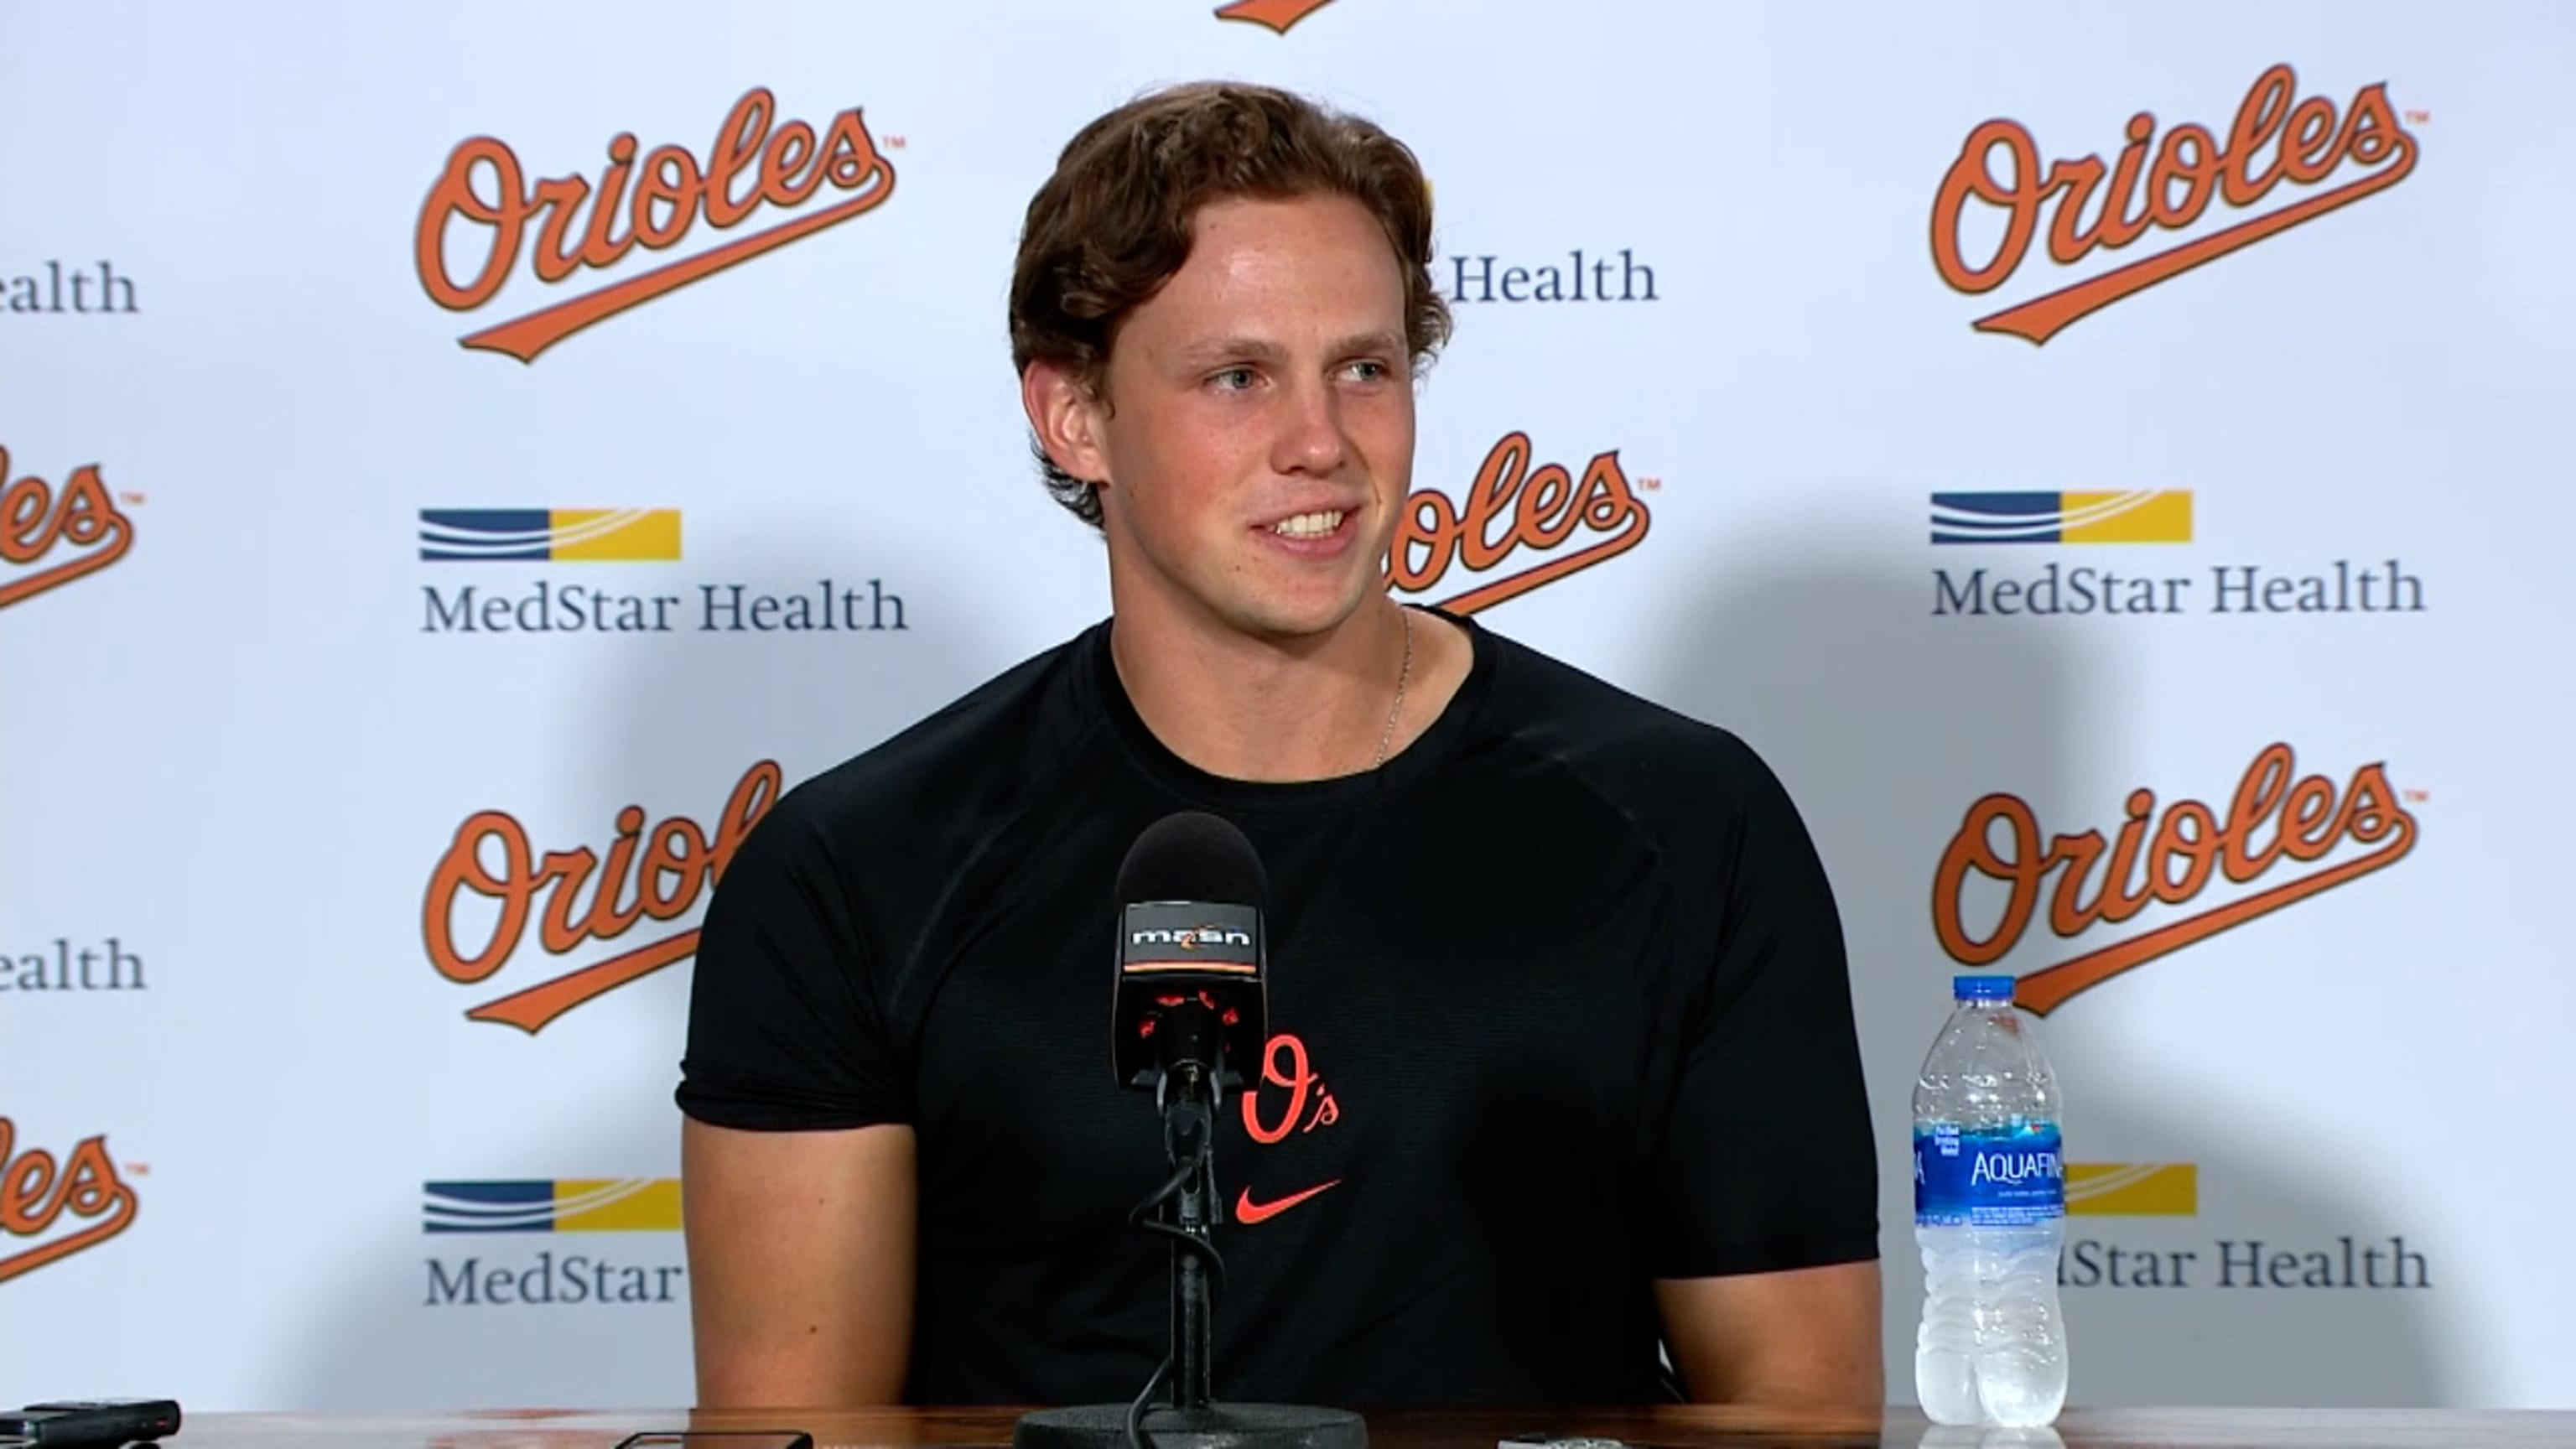 Adley Rutschman makes history for Orioles in MLB opening day